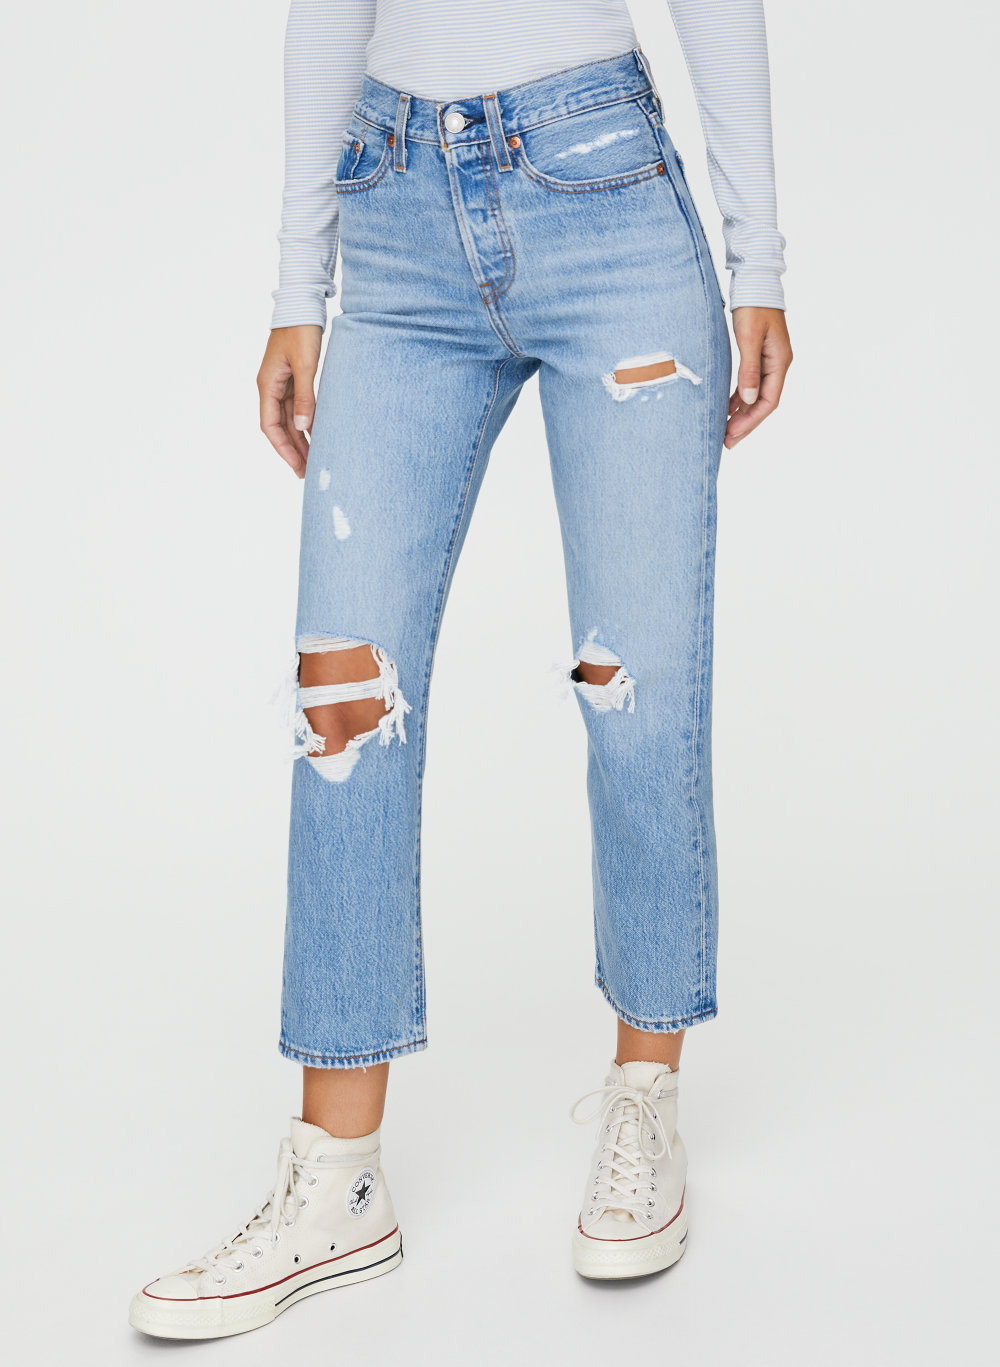 levis wedgie jeans straight